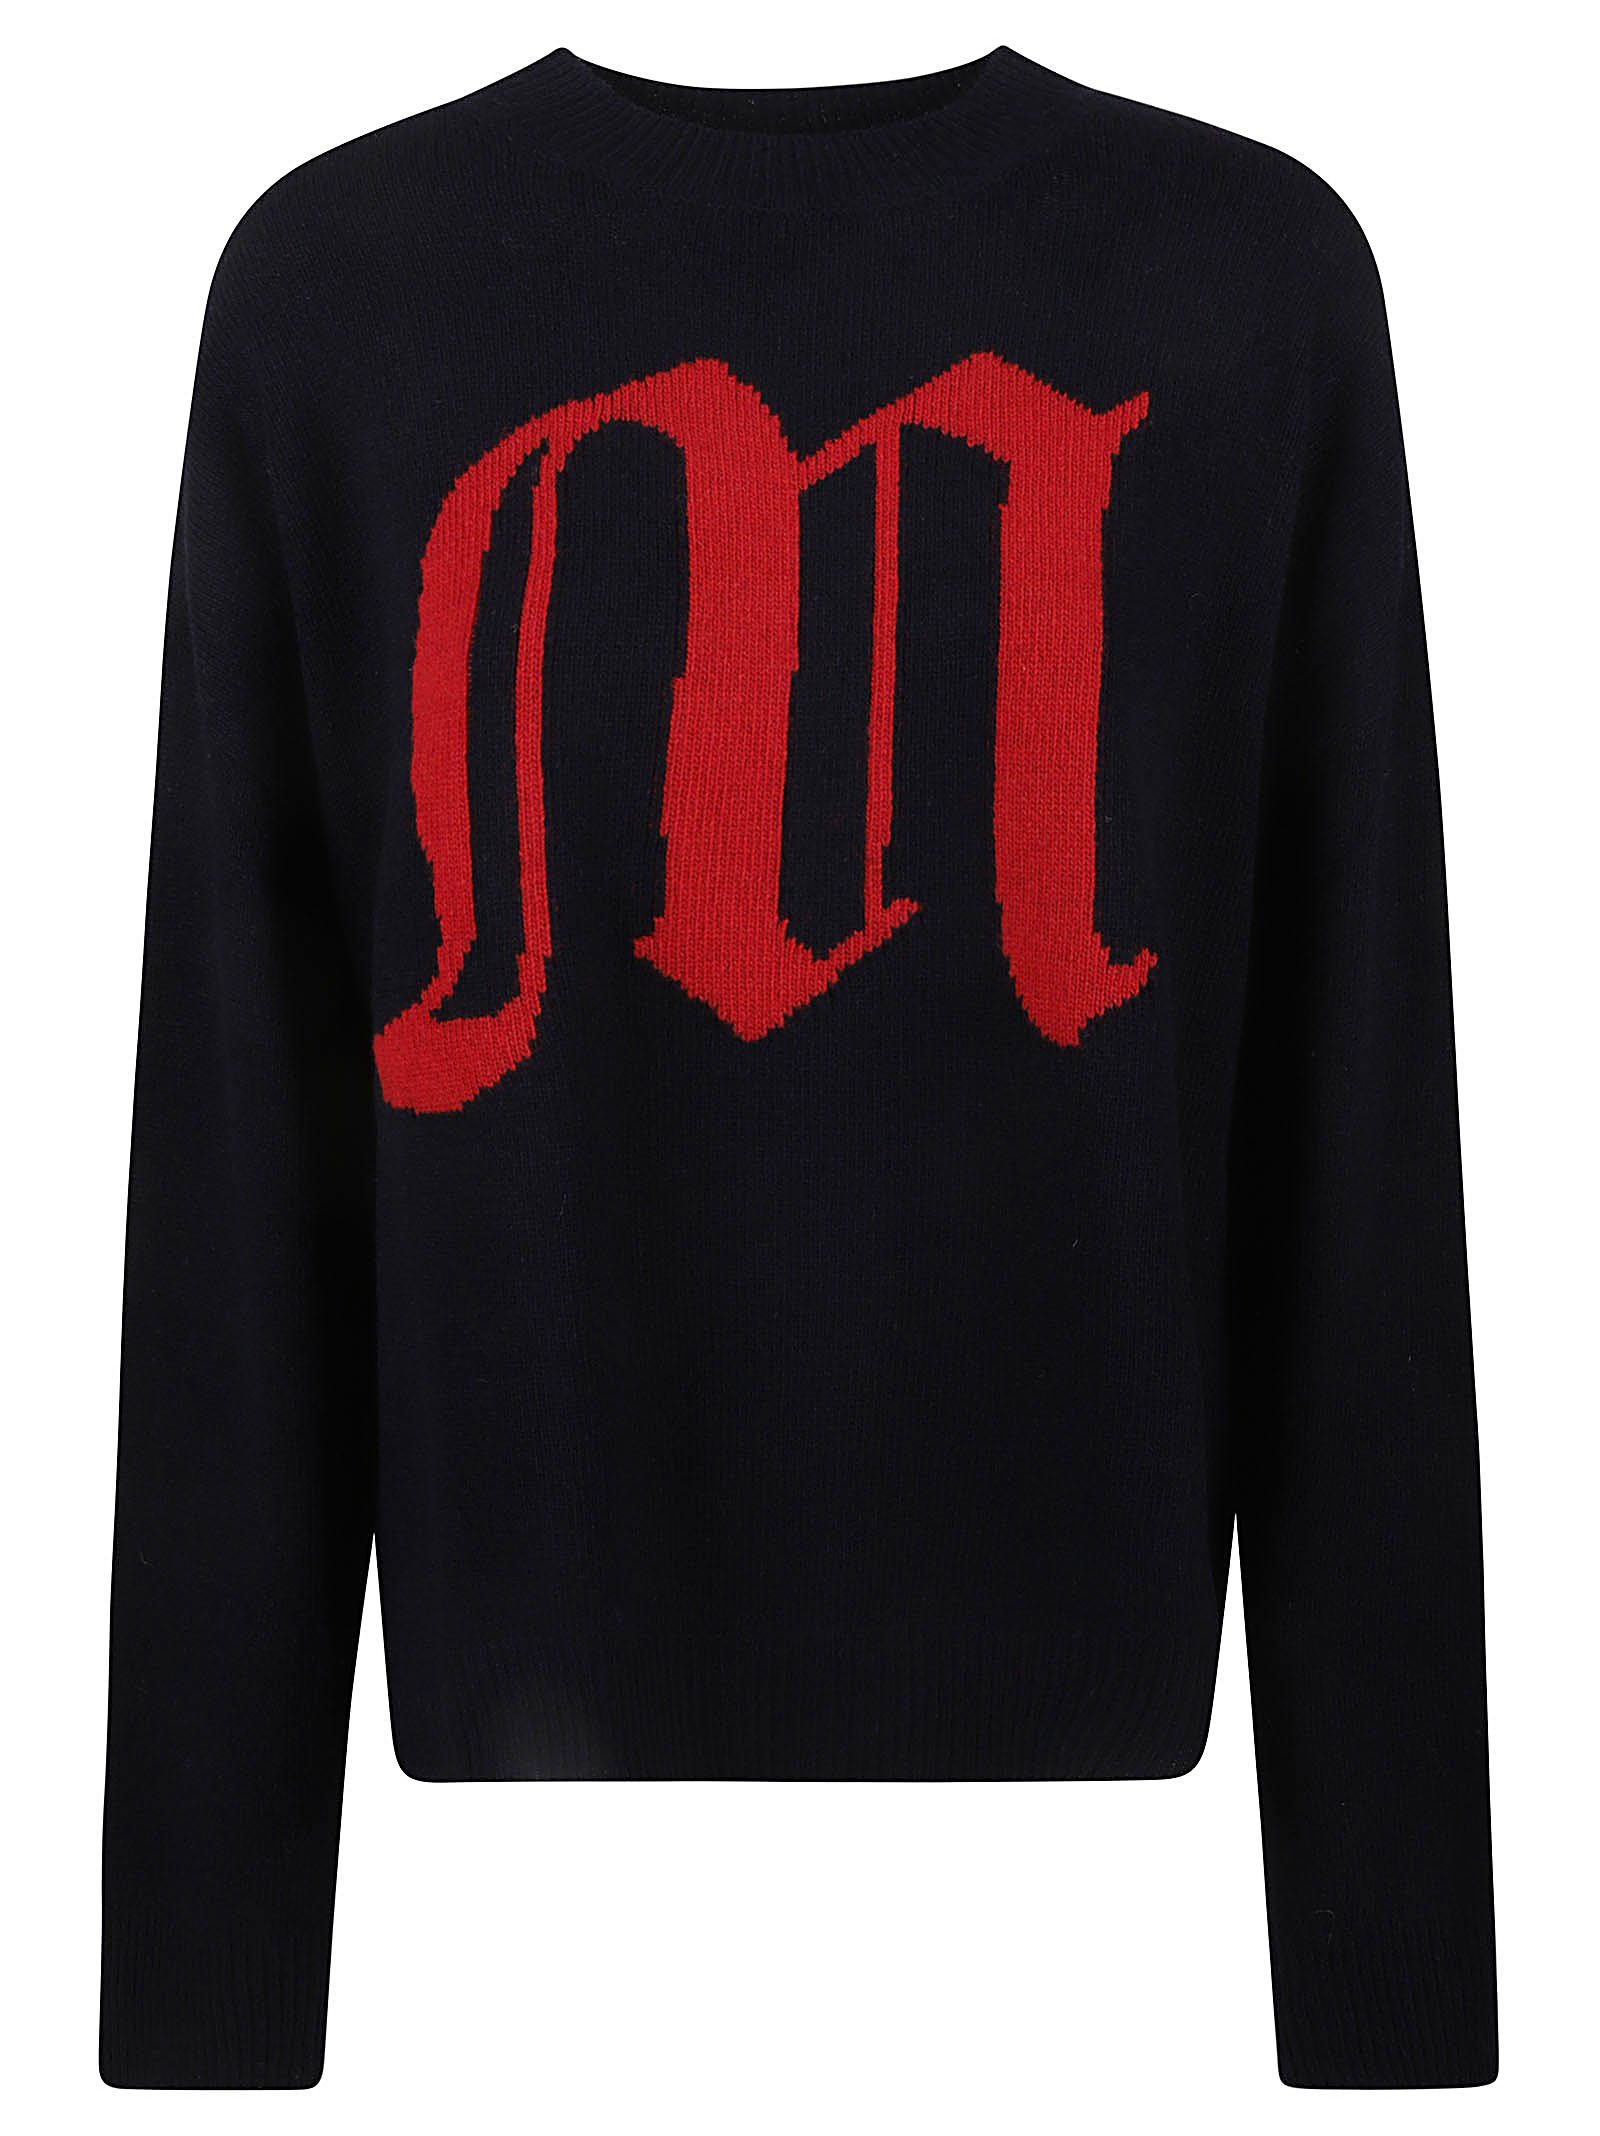 MSGM 77 LOGO EMBROIDERED KNIT SWEATER